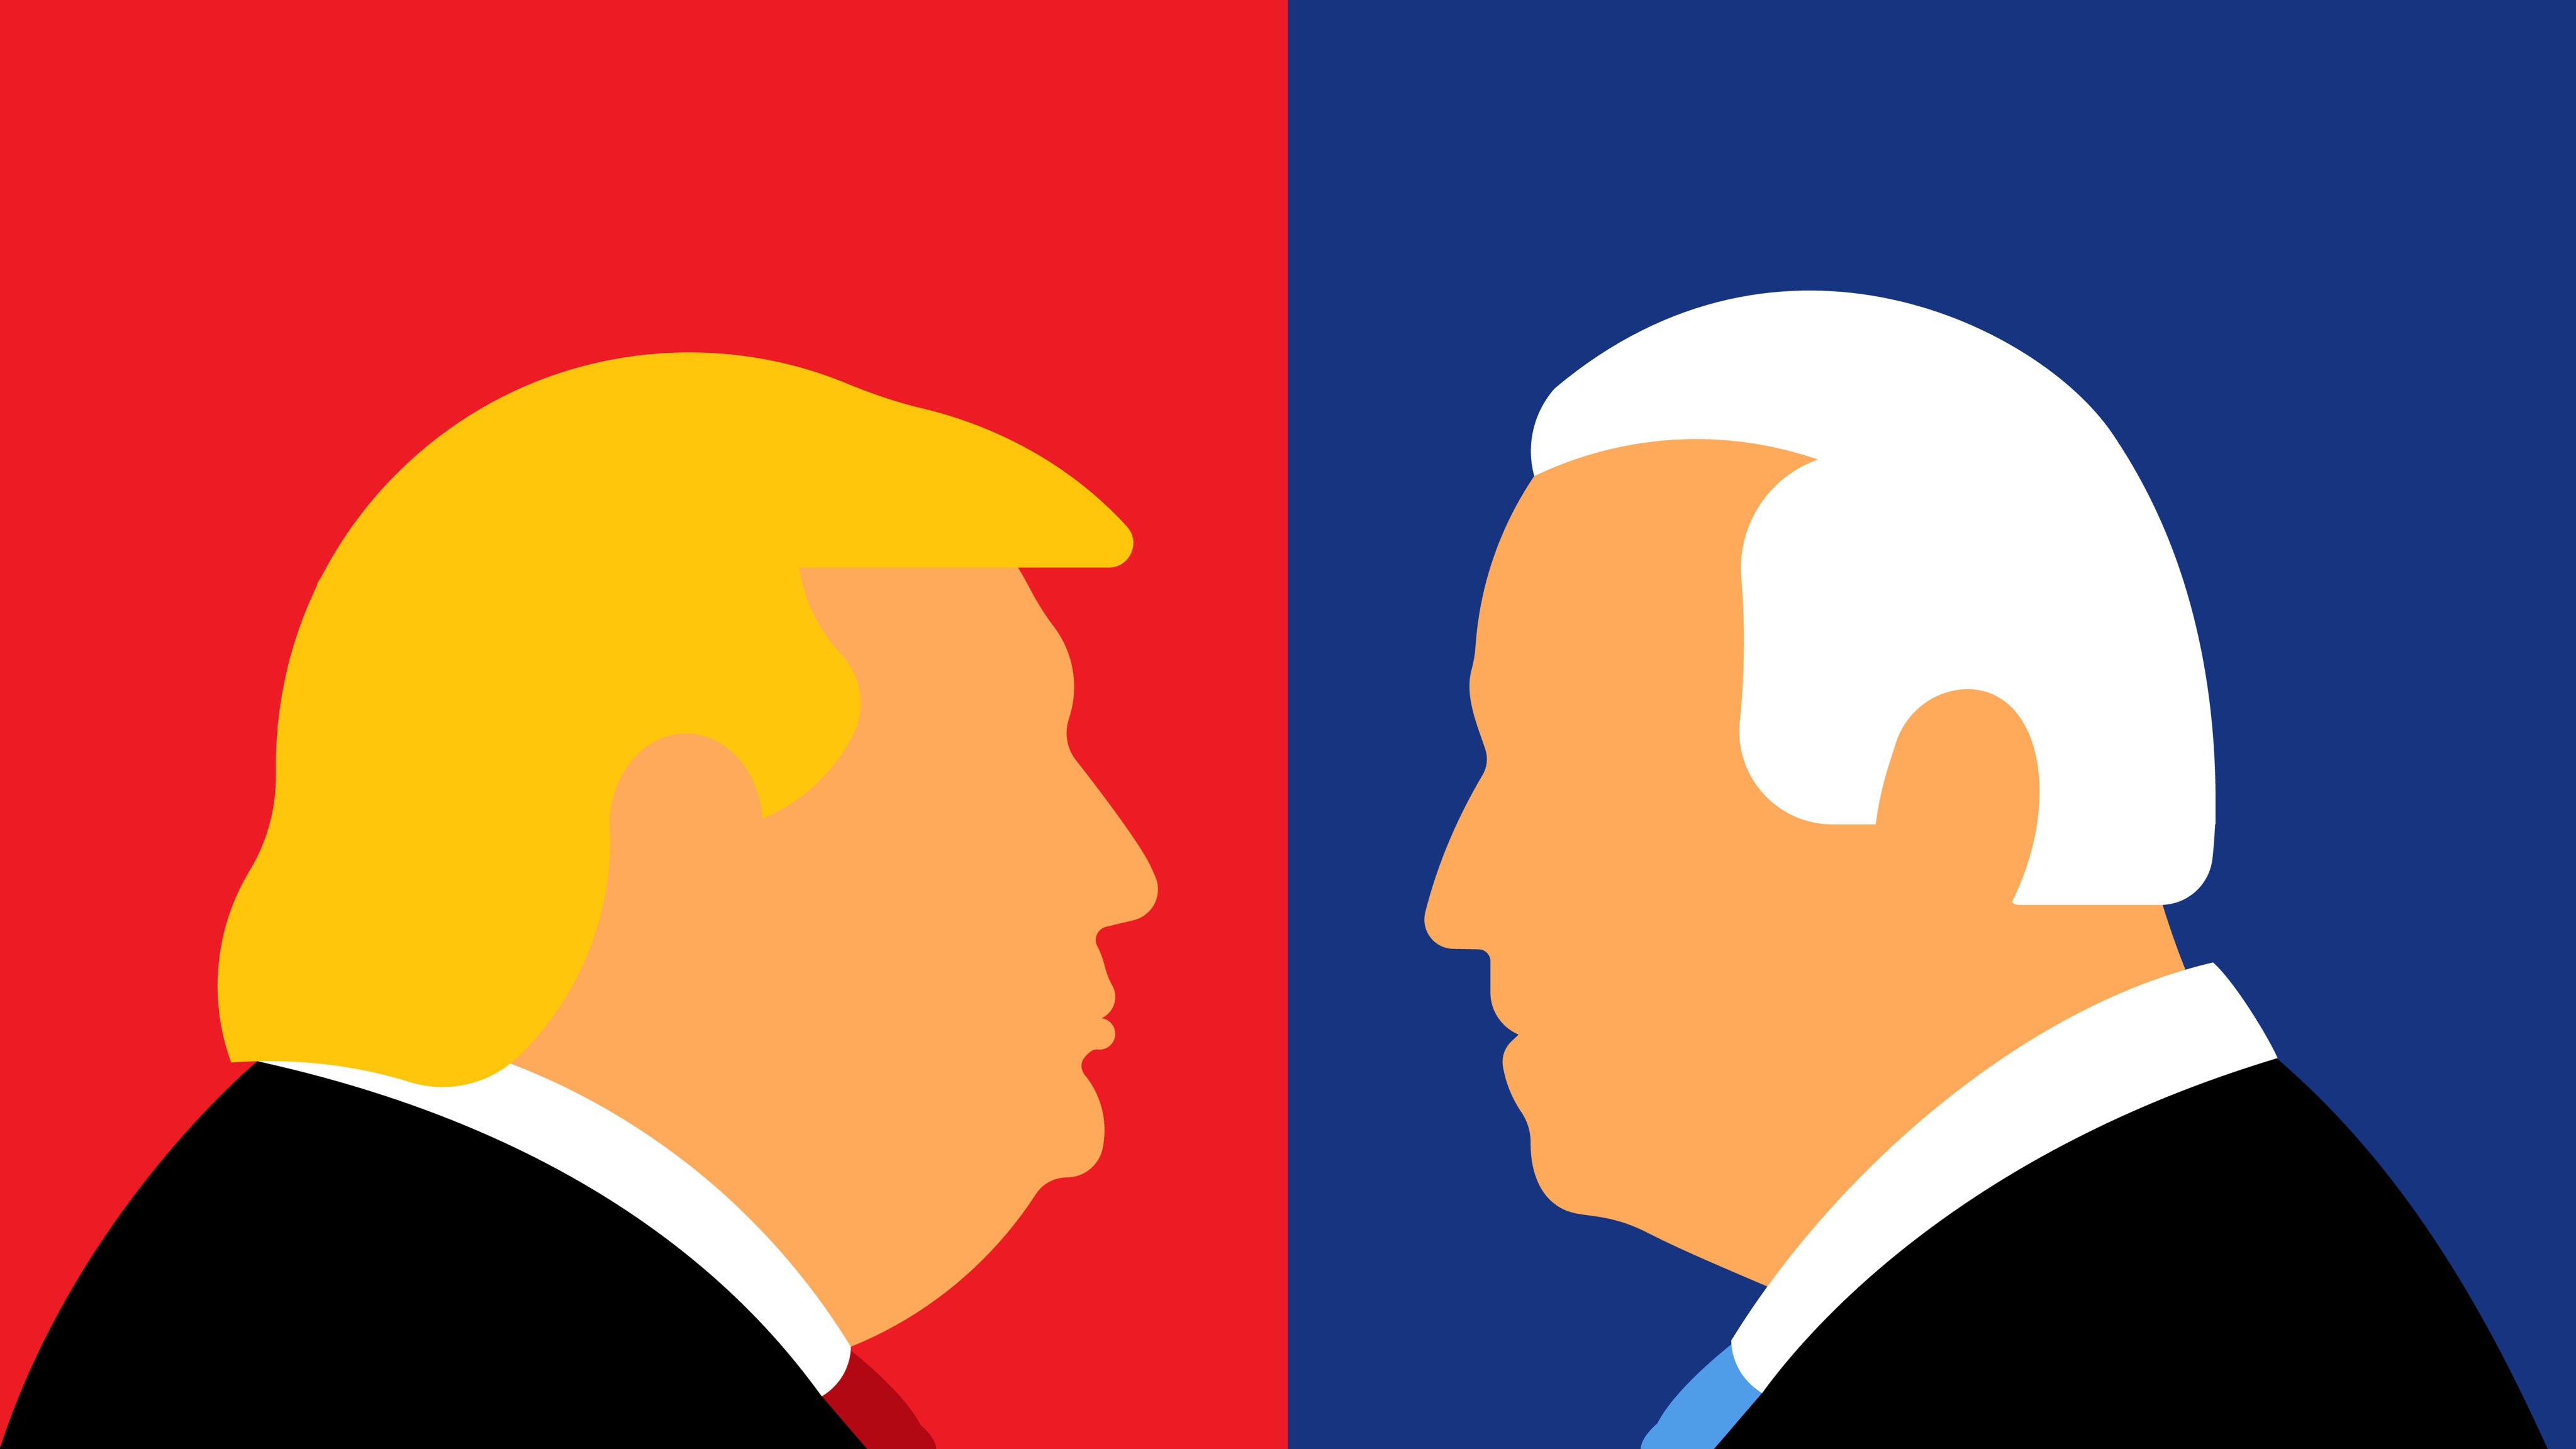 The 2024 US presidential election is likely to be a repeat of 2020, pitting president Joe Biden against former president Donald Trump. Photo: Shutterstock